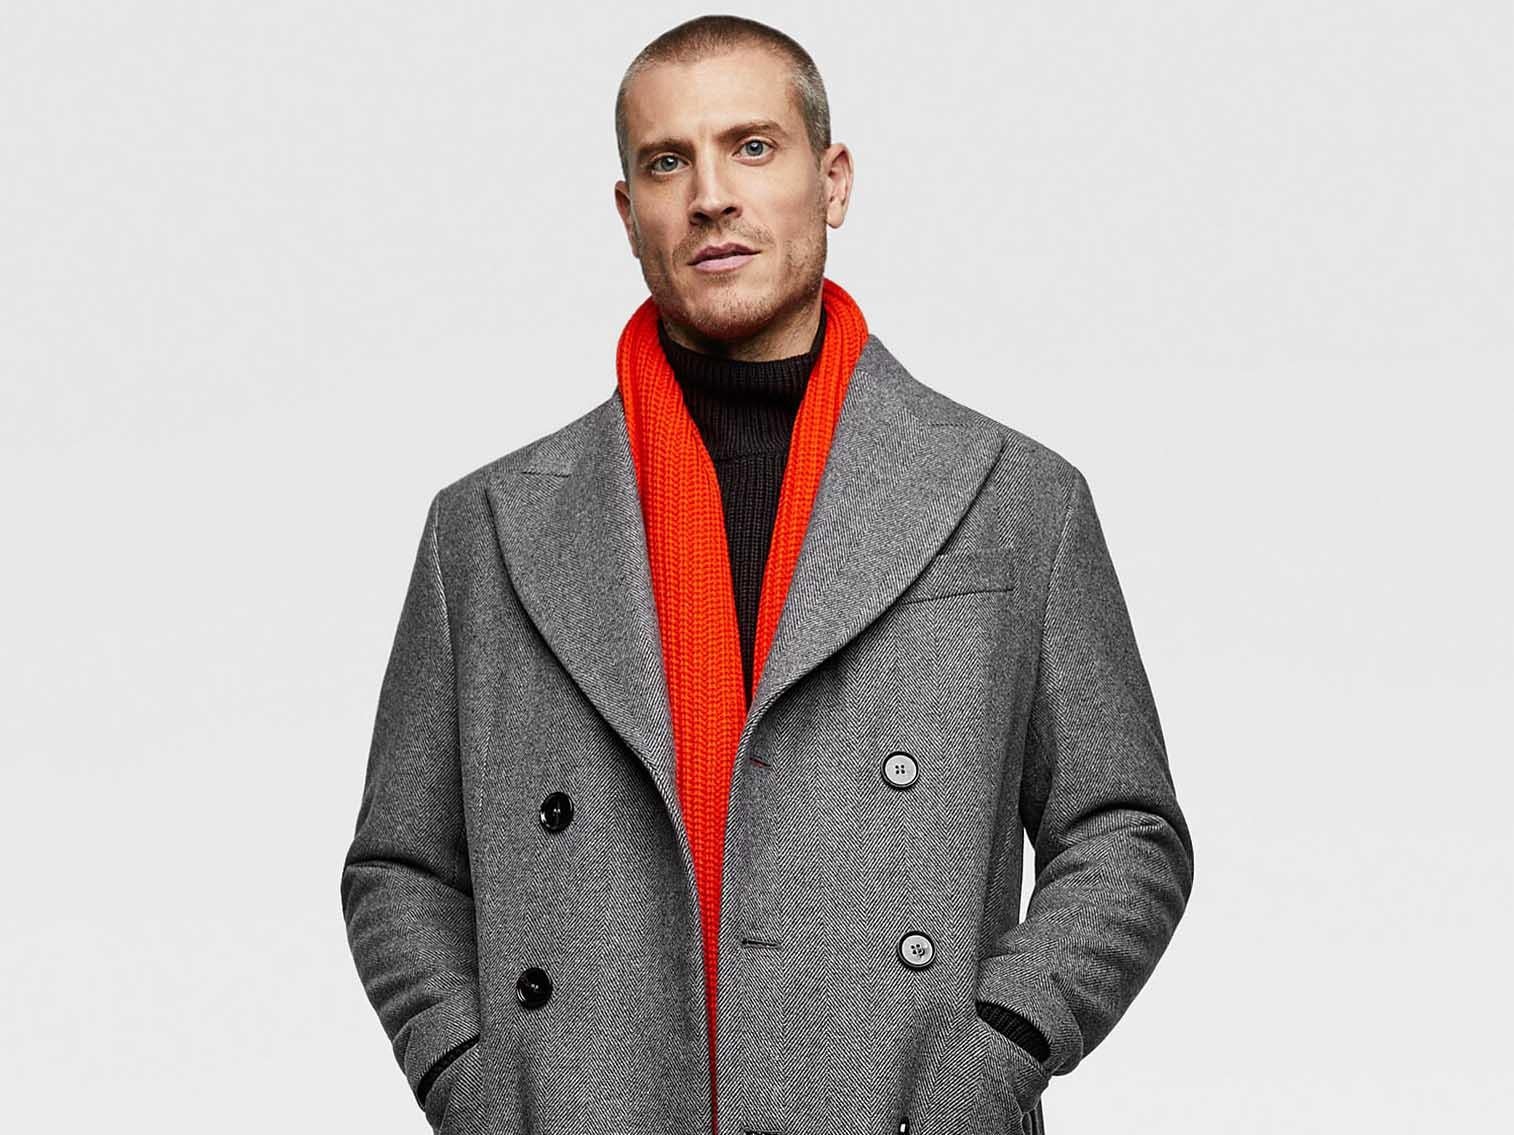 Double Breasted Coat, £159 & Knit Scarf, £19.99, Zara